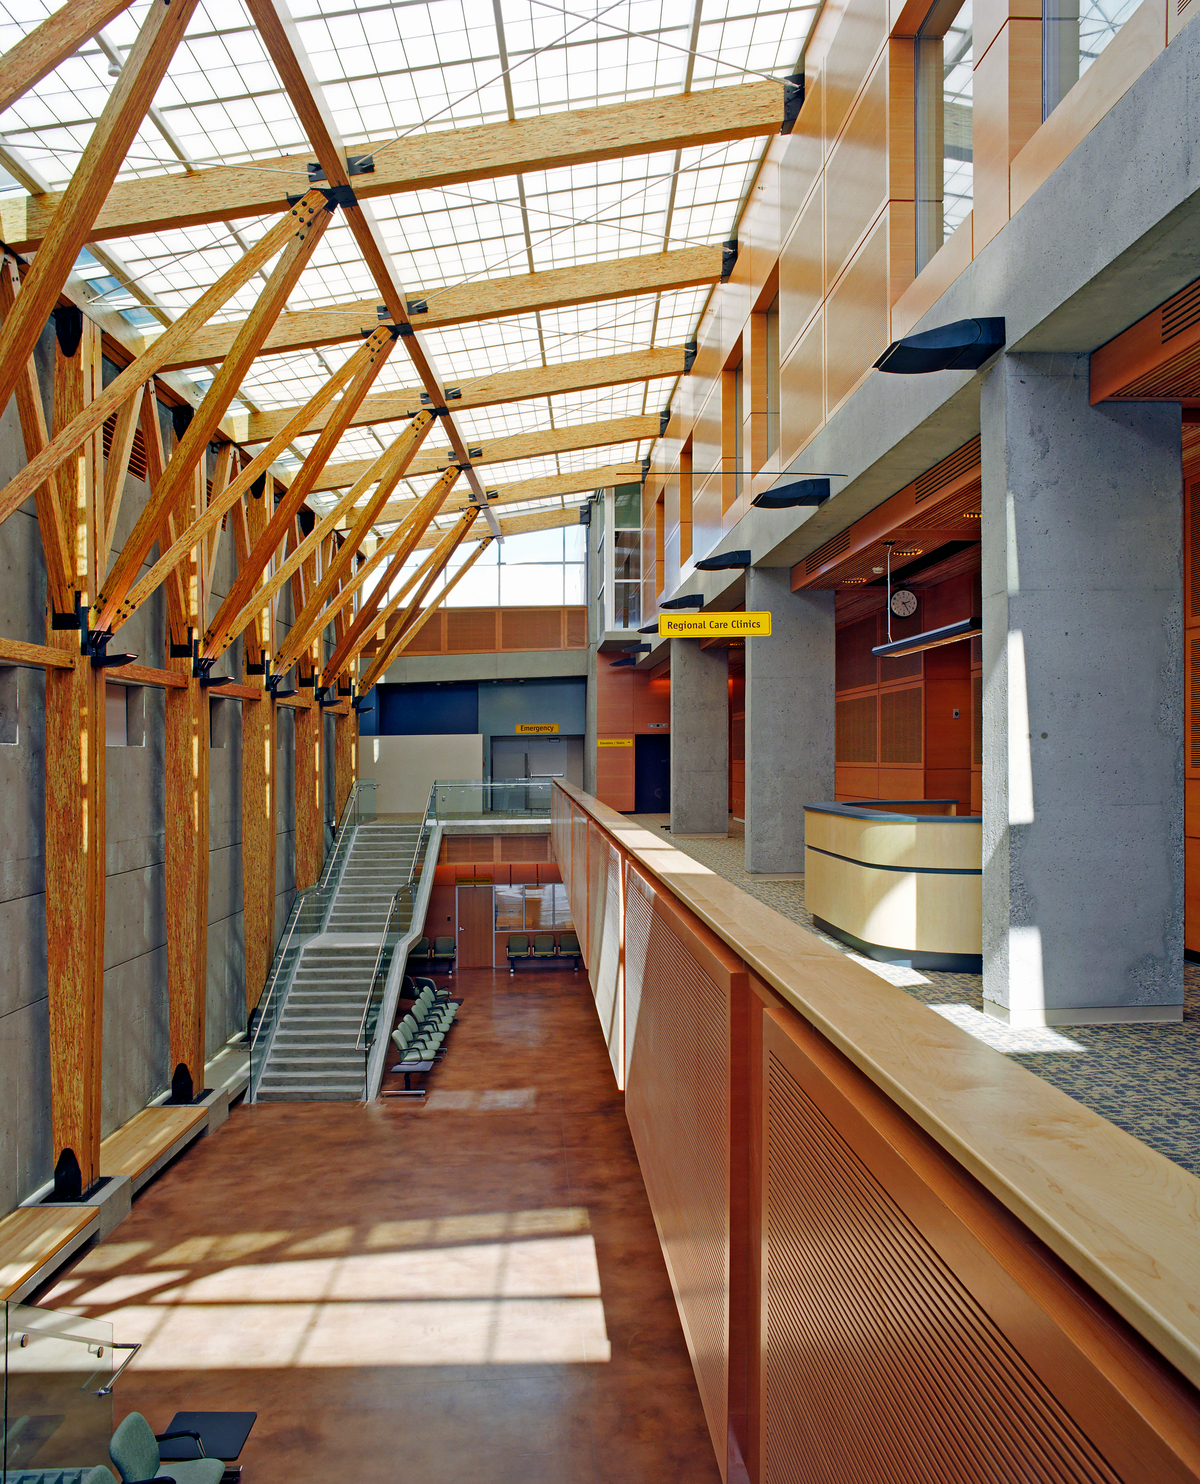 parallel strand lumber (PSL) columns and beams feature prominently in this interior daytime atrium view of the multi storey mid rise University Hospital of Northern British Columbia